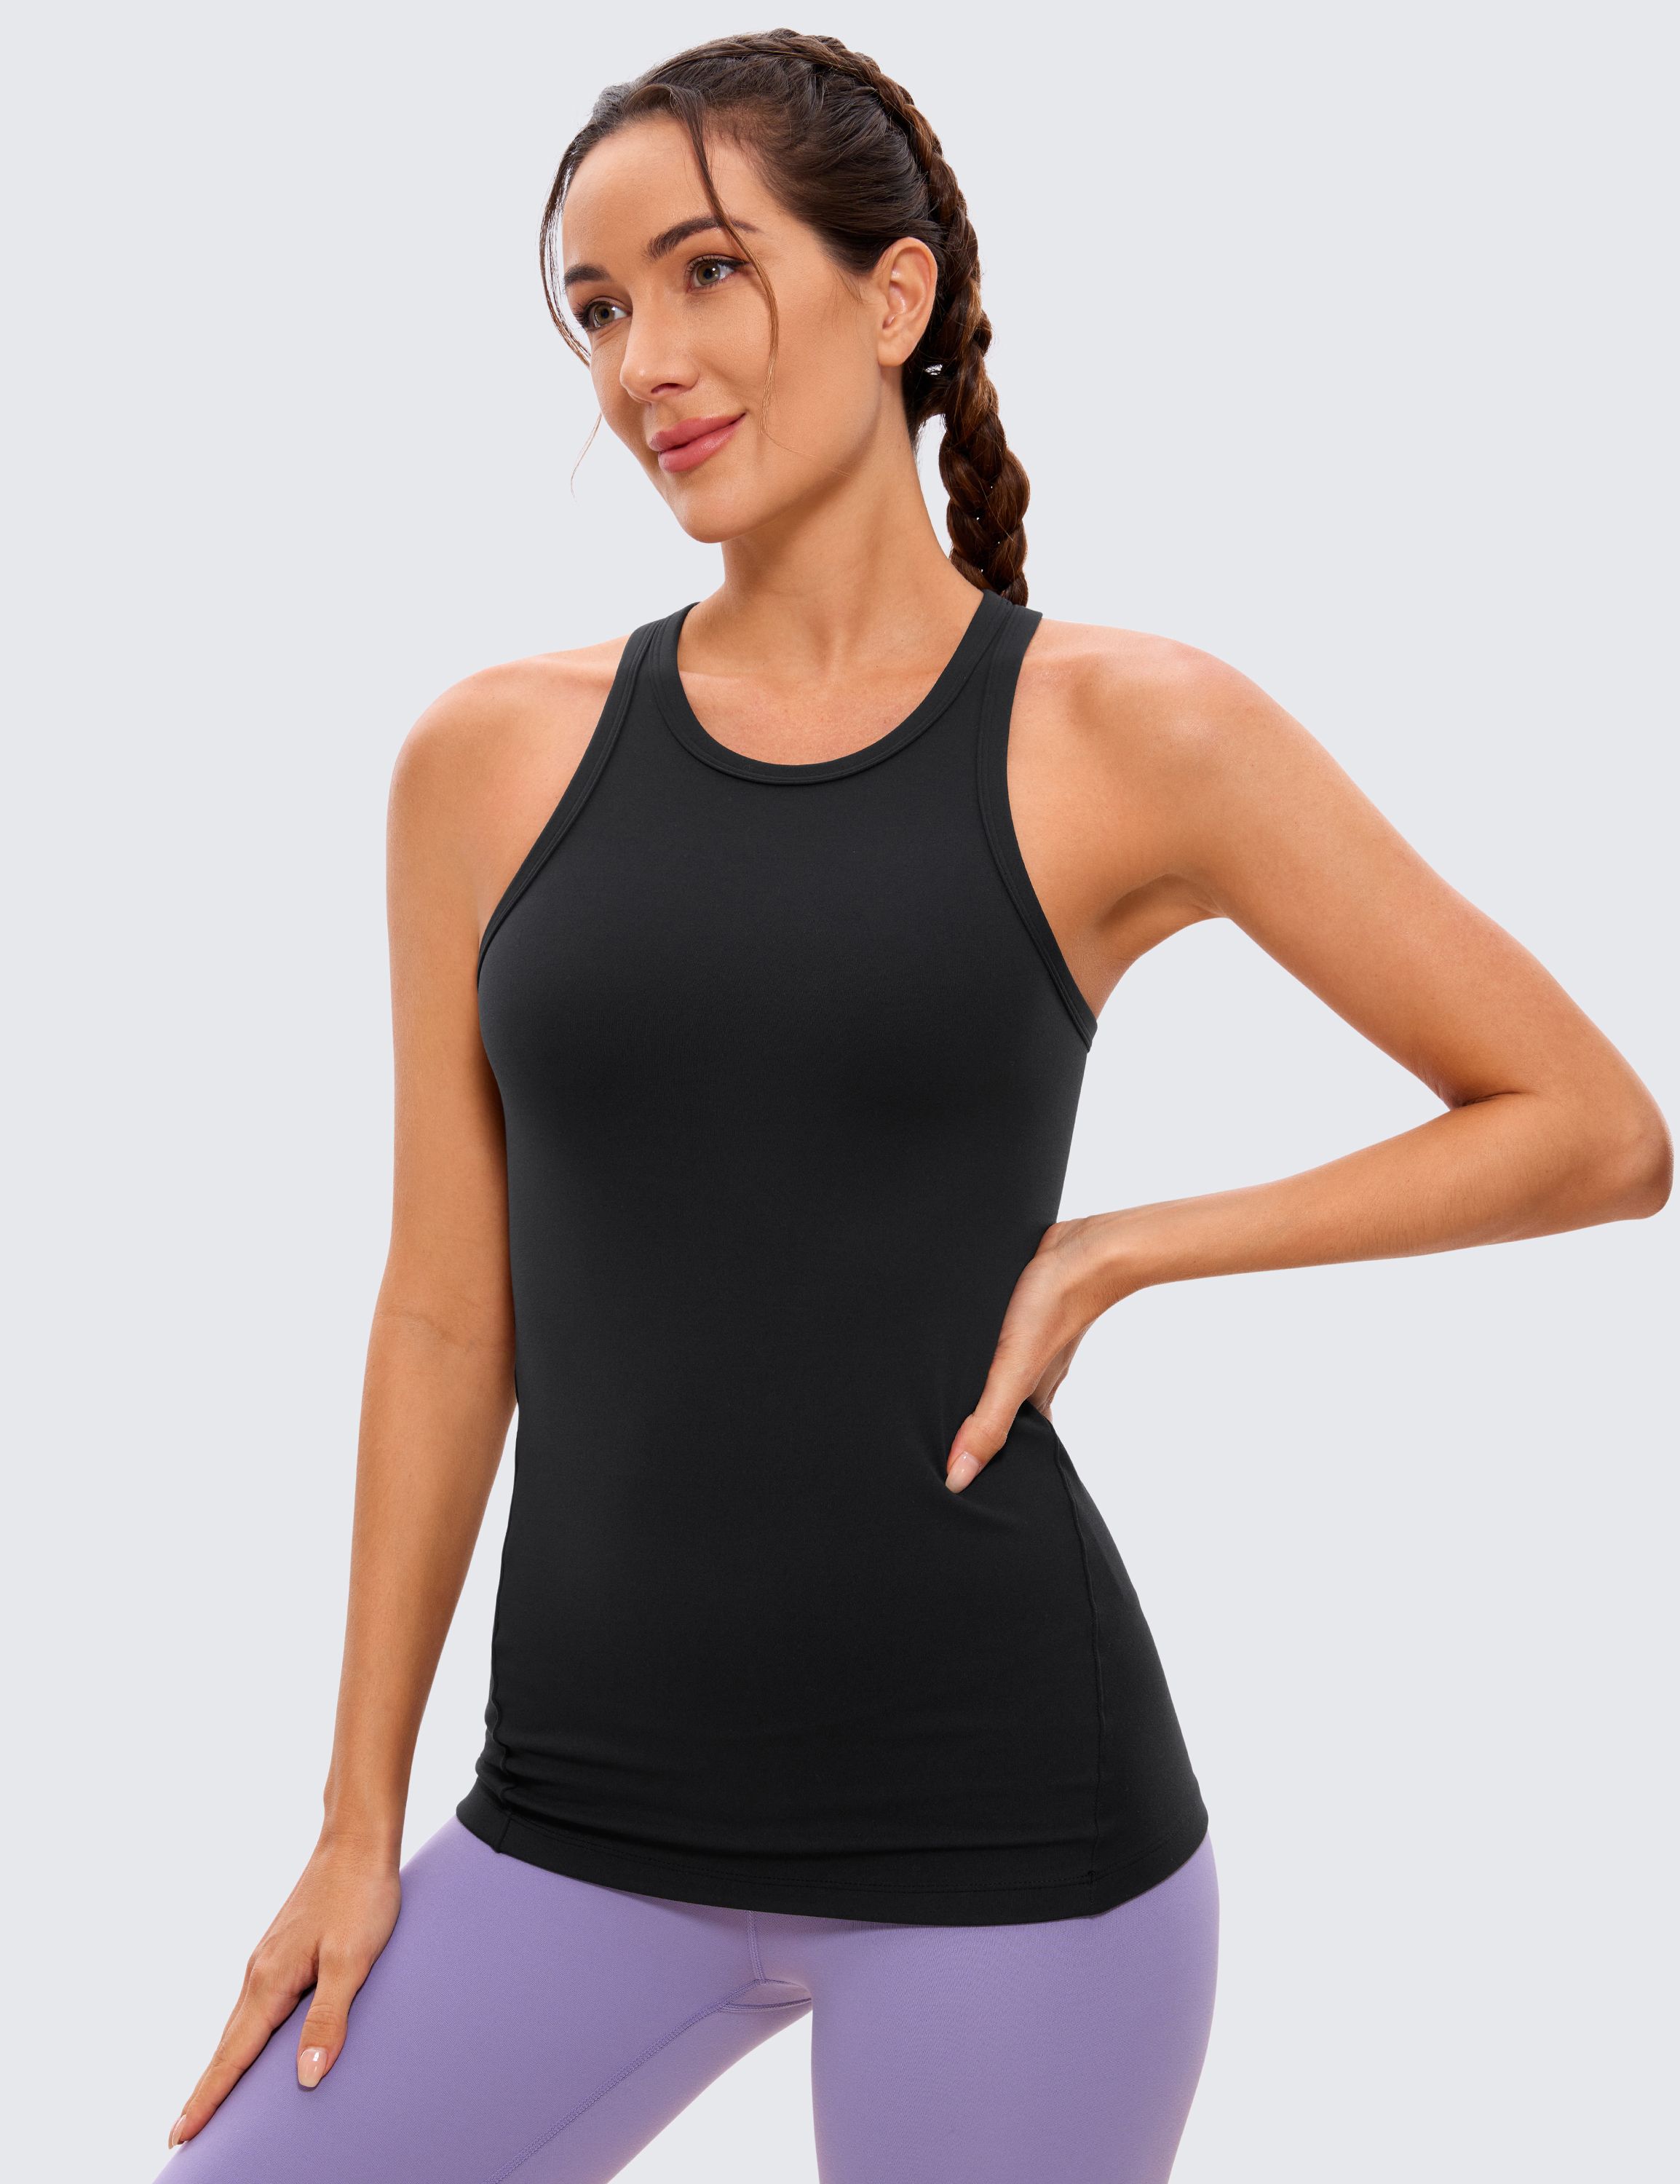 Butterluxe Womens V Neck Workout Tank Tops with Built in Bras - Sleeveless  Padded Racerback Yoga Athletic Camisole